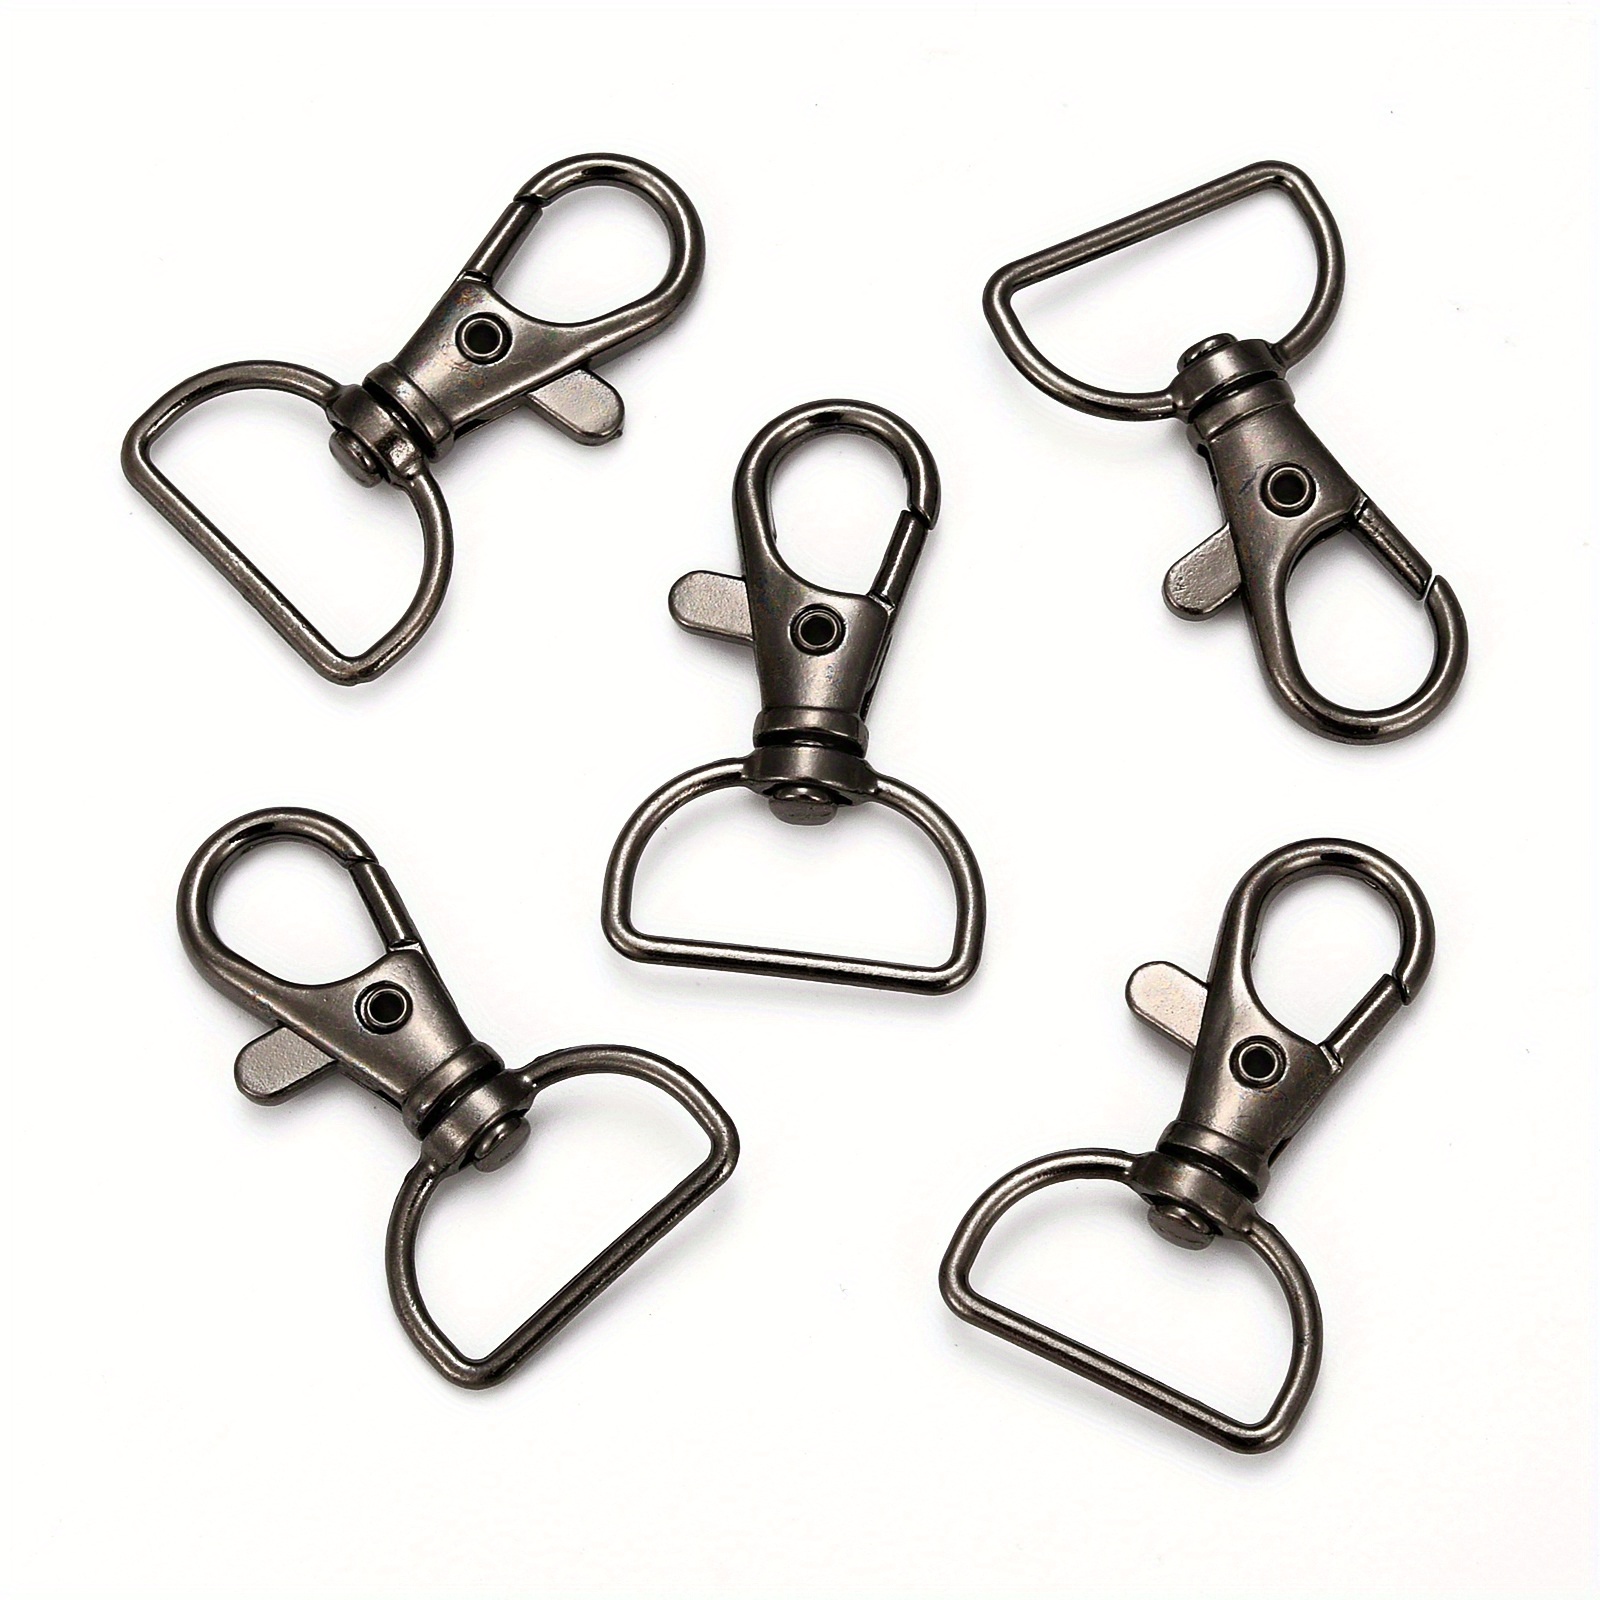 Swivel Snap Hooks with Key Rings 10pcs Iron Lobster Claw Clasps